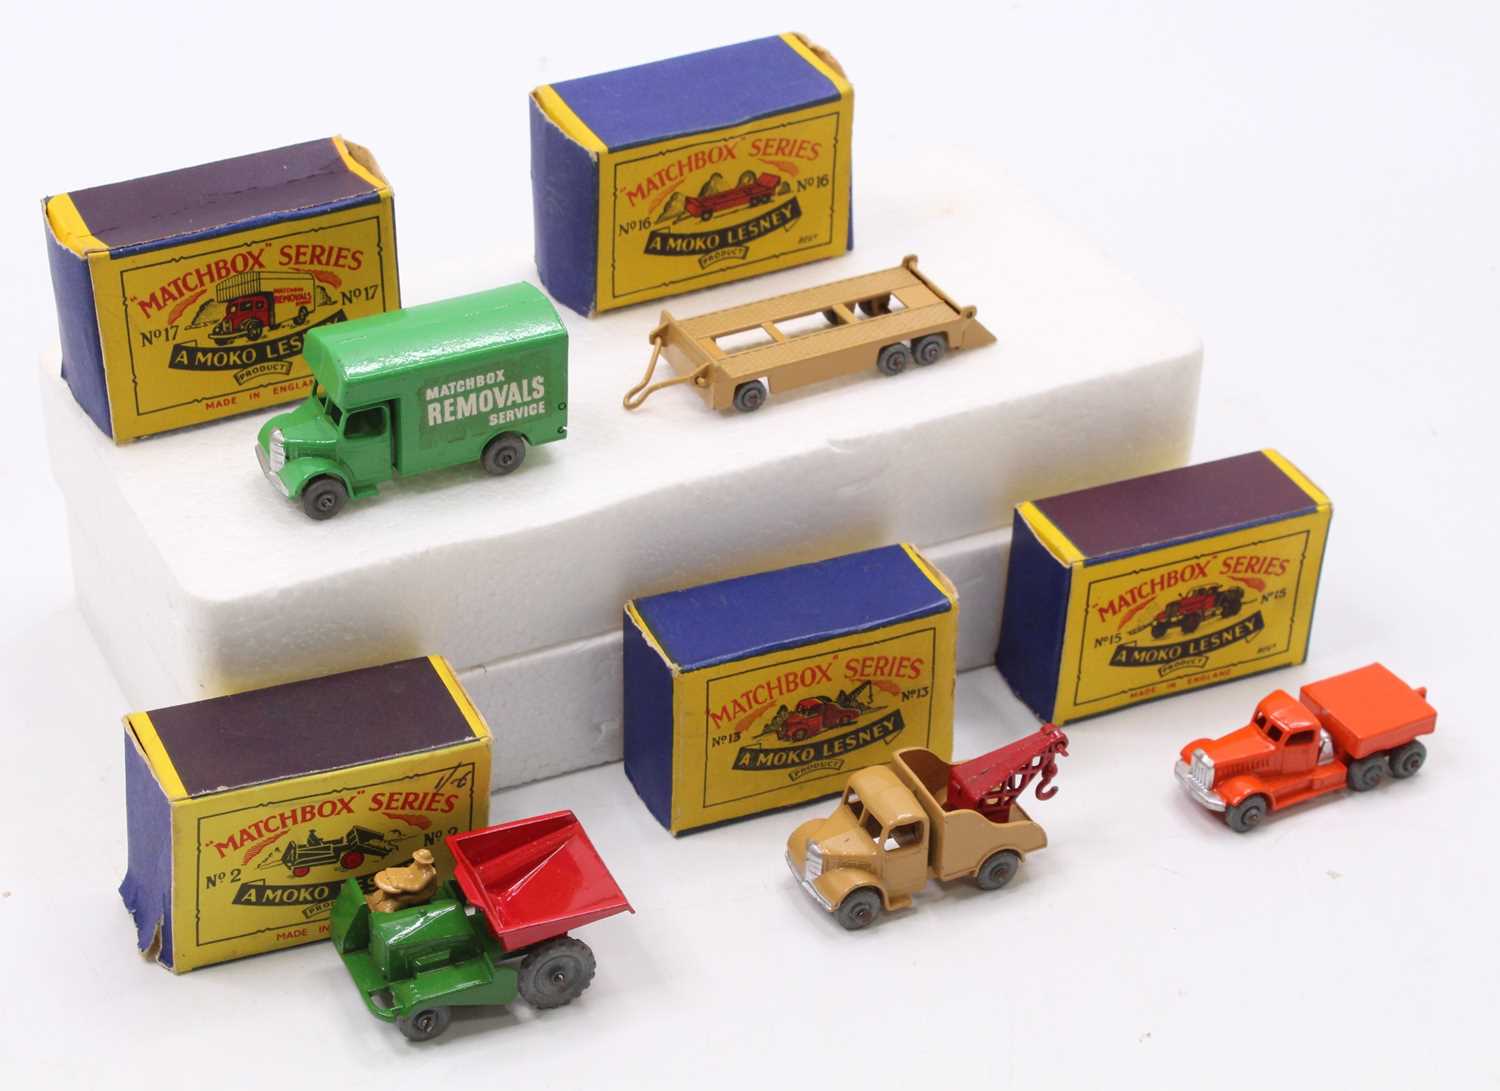 Matchbox Lesney boxed model group of 5 comprising No. 17 Bedford Removals Van, No. 2 Muir Hill